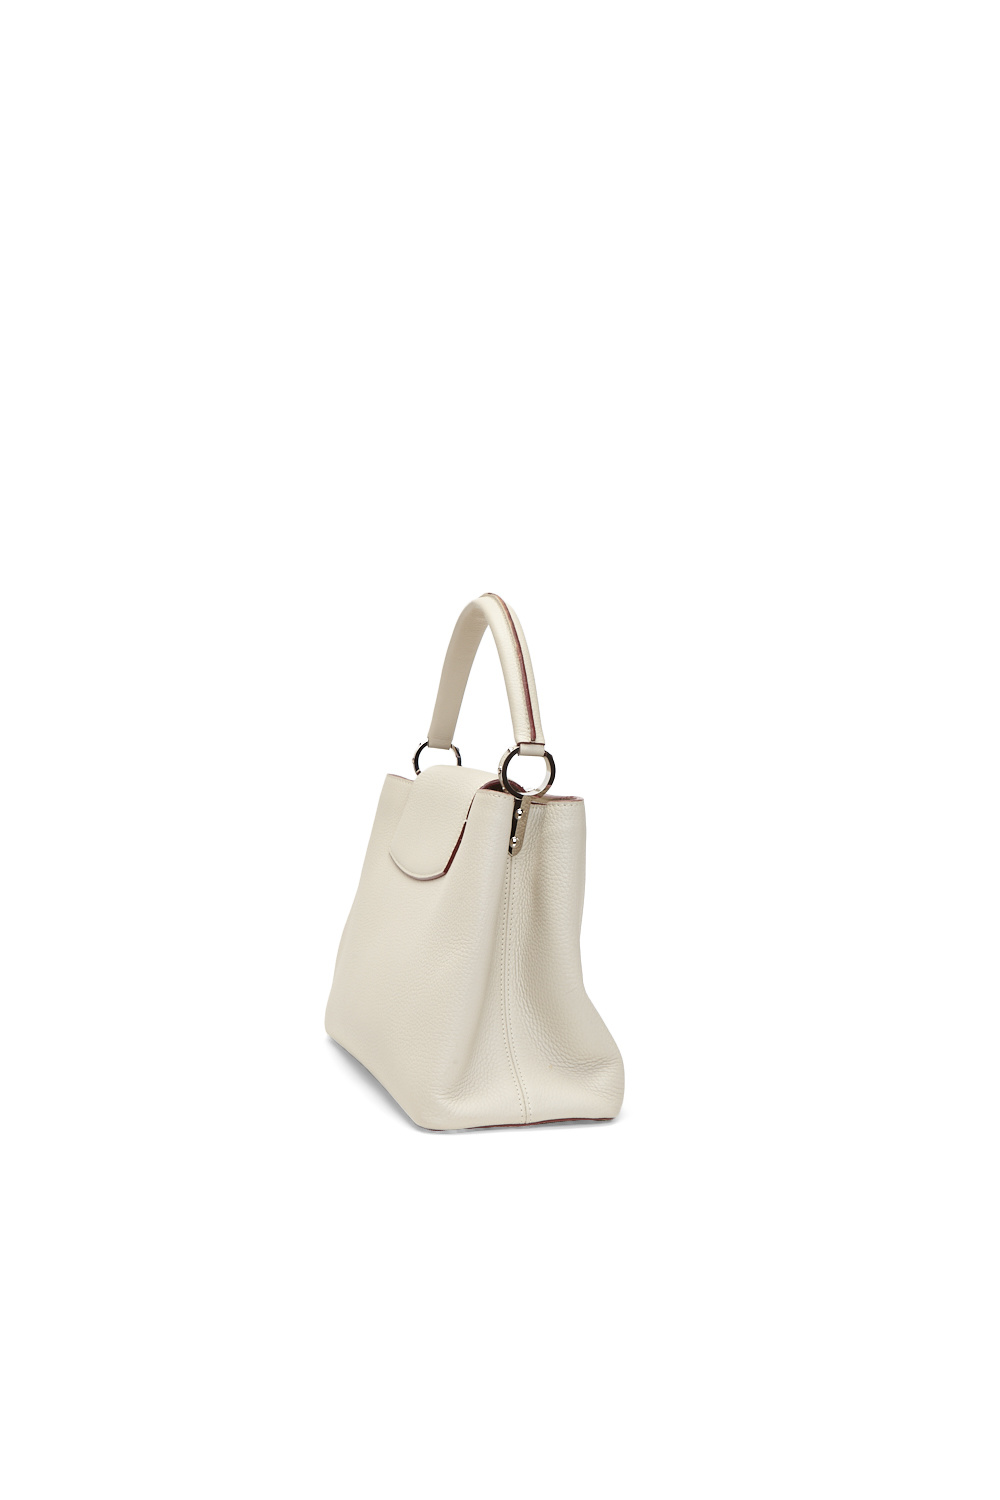 Louis Vuitton White Taurillon Leather Capucines MM Bag - RETYCHE